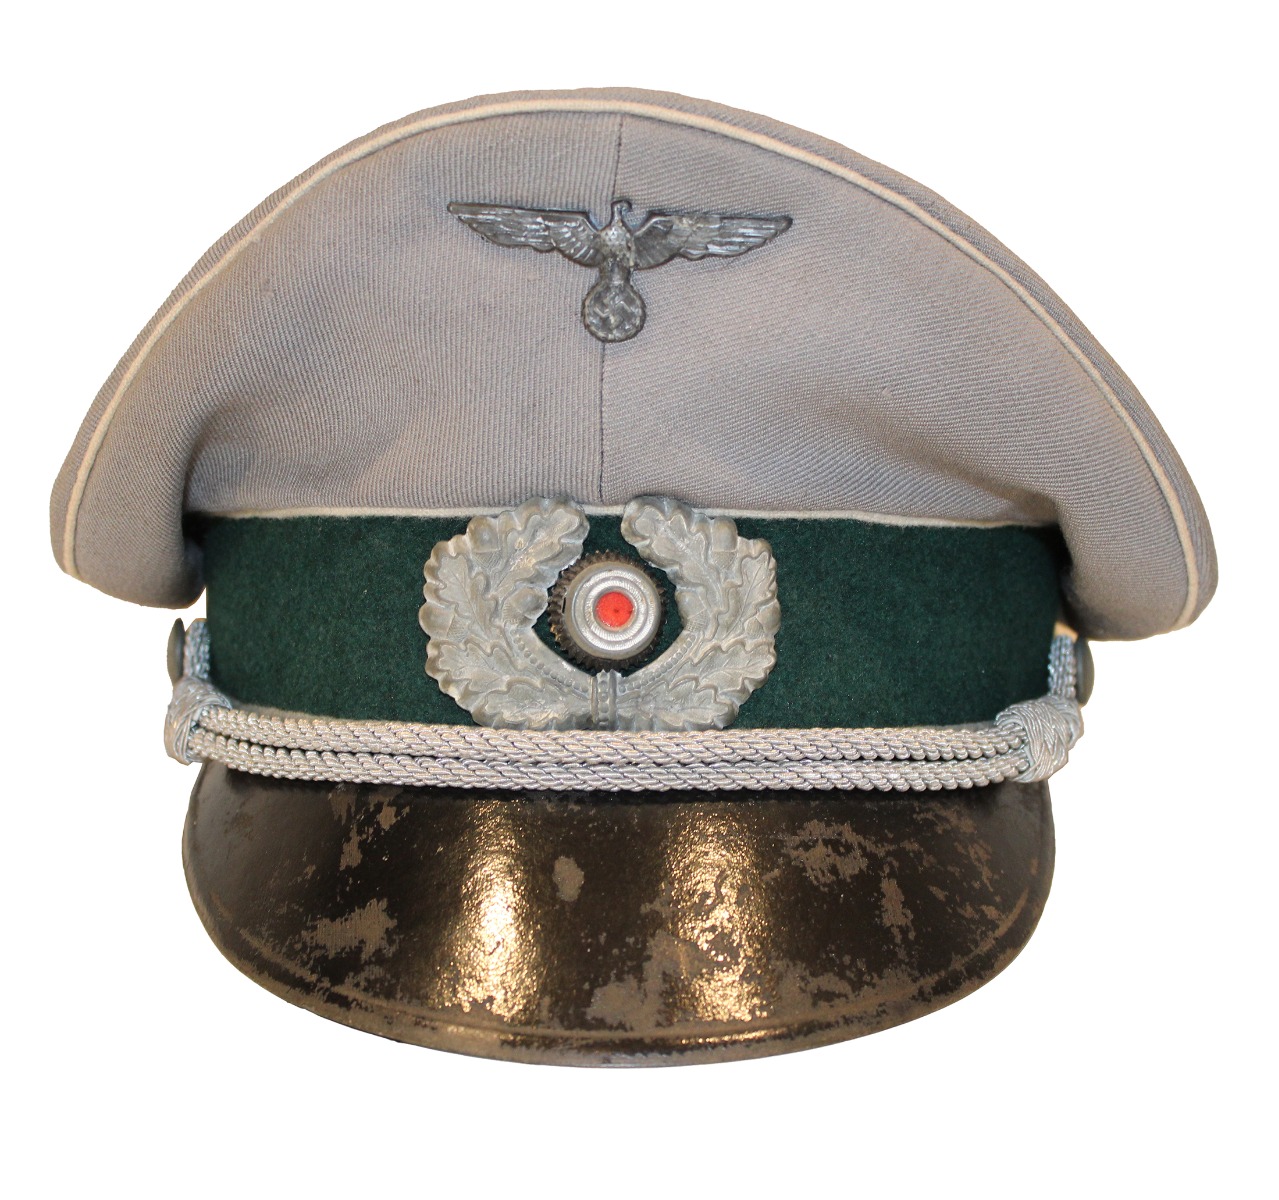 GERMAN HEER OFFICER VISOR CAP WITH COCKADE AND EAGLE